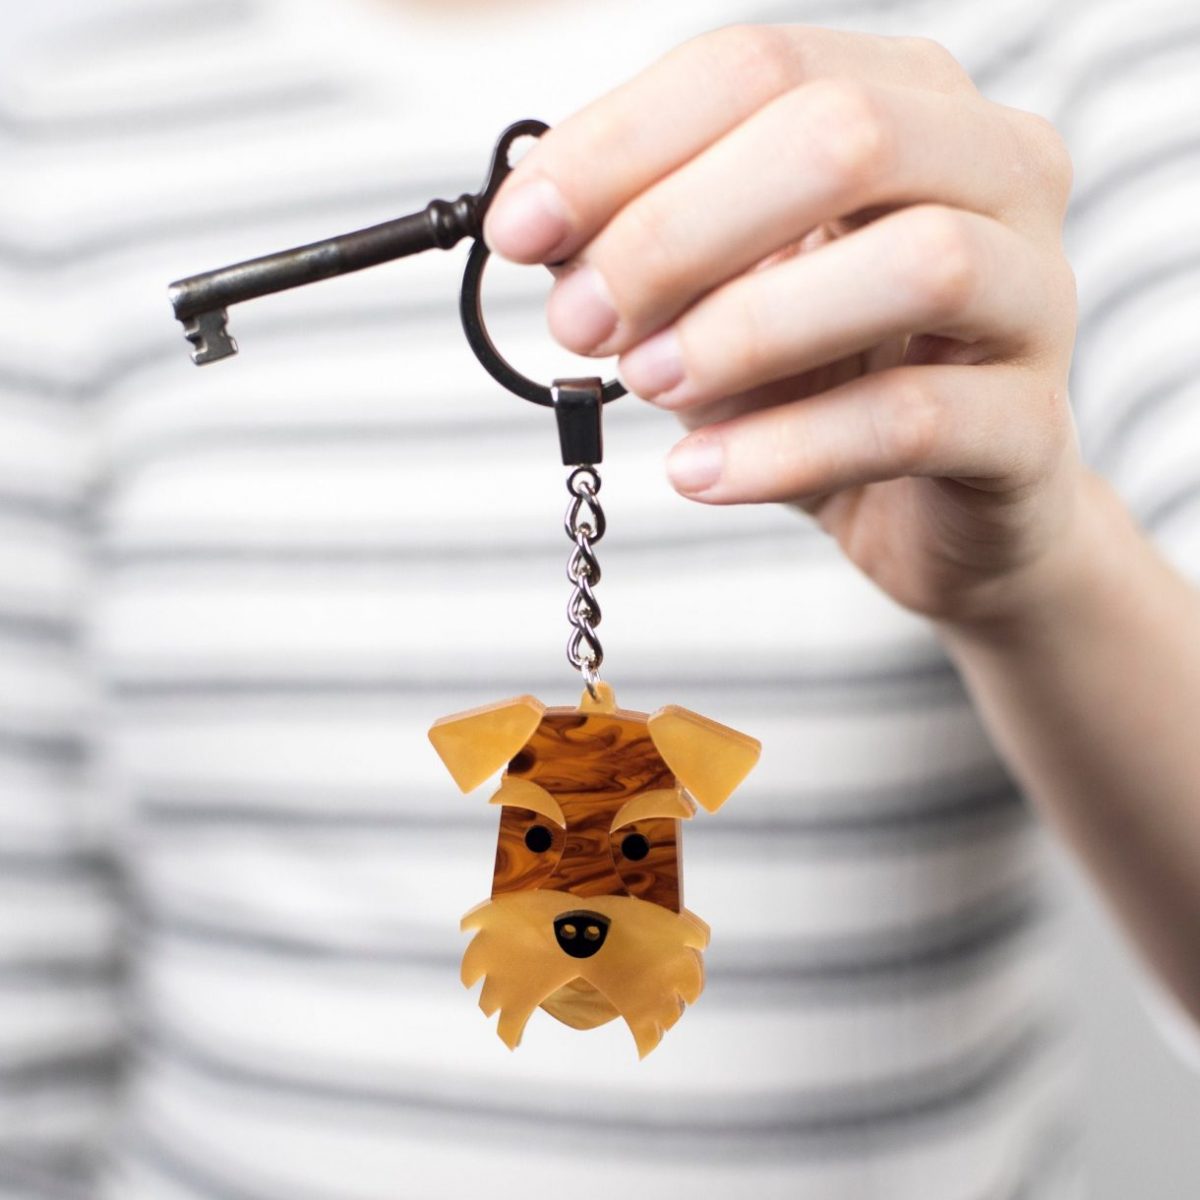 Airedale Terrier Dog Keyring, Dog Lover Gift, Animal Key Fob, Pet Key Chain, Gift for Her, New Home Gift, Laser Cut Acrylic Dog Key Holder